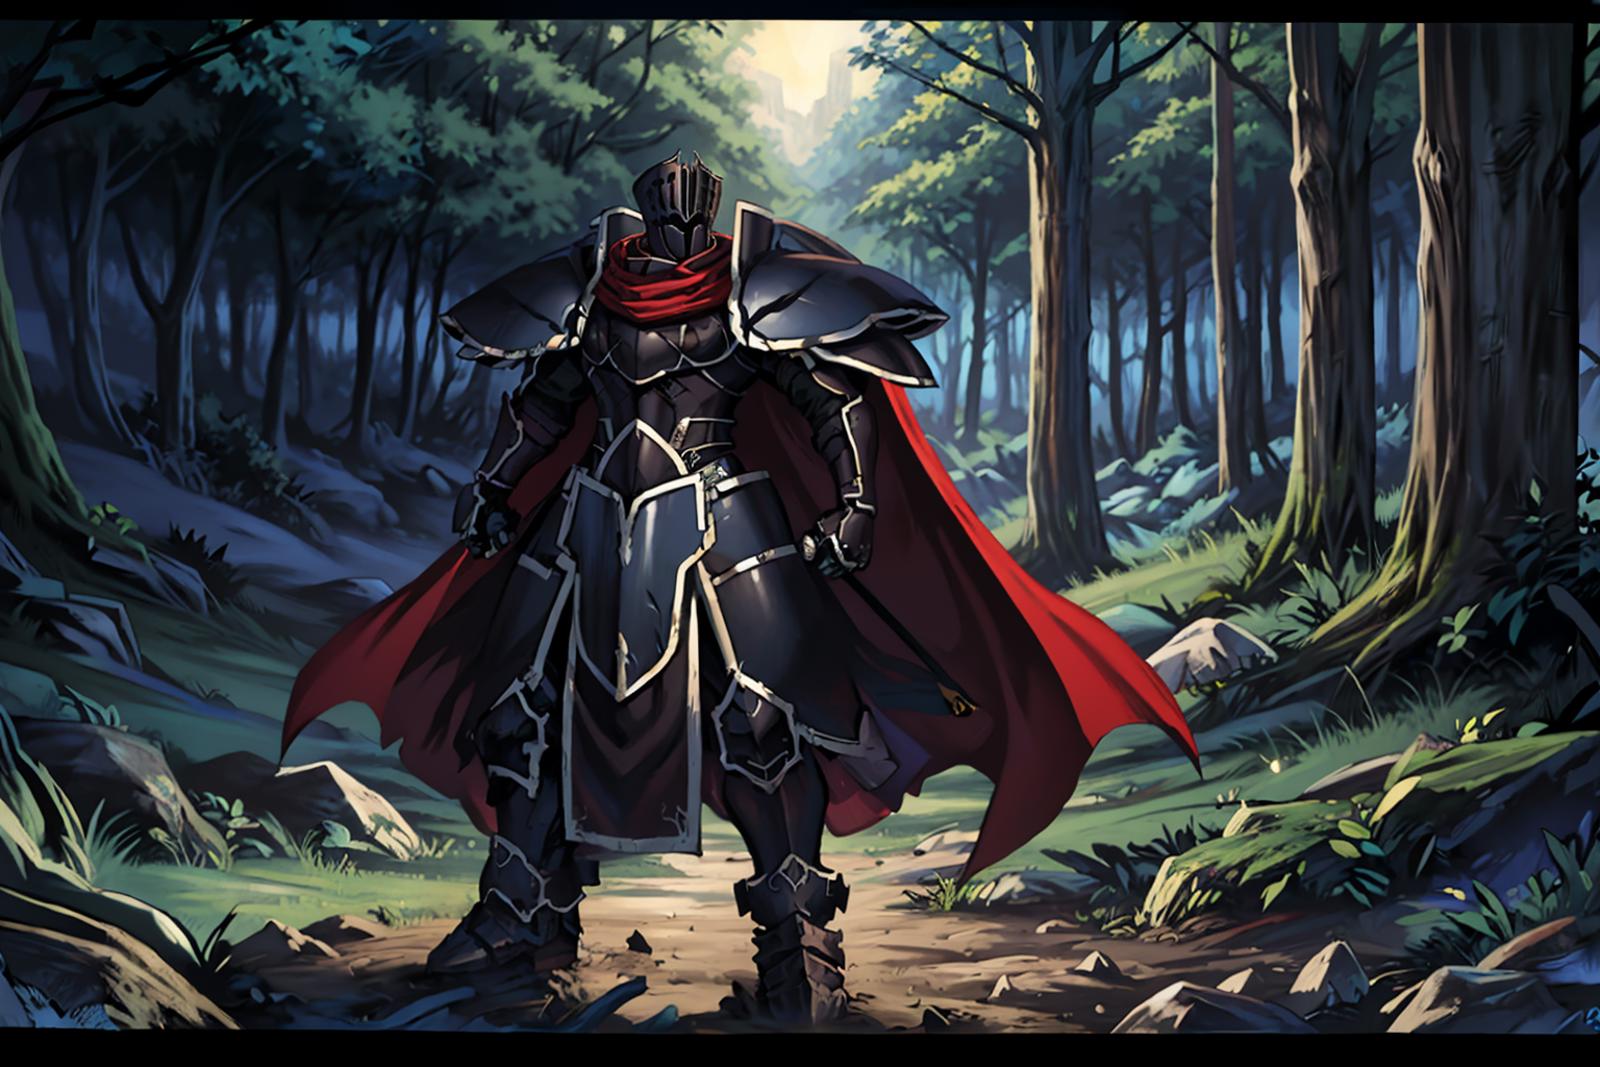 The Black Knight - Fire Emblem image by novowels